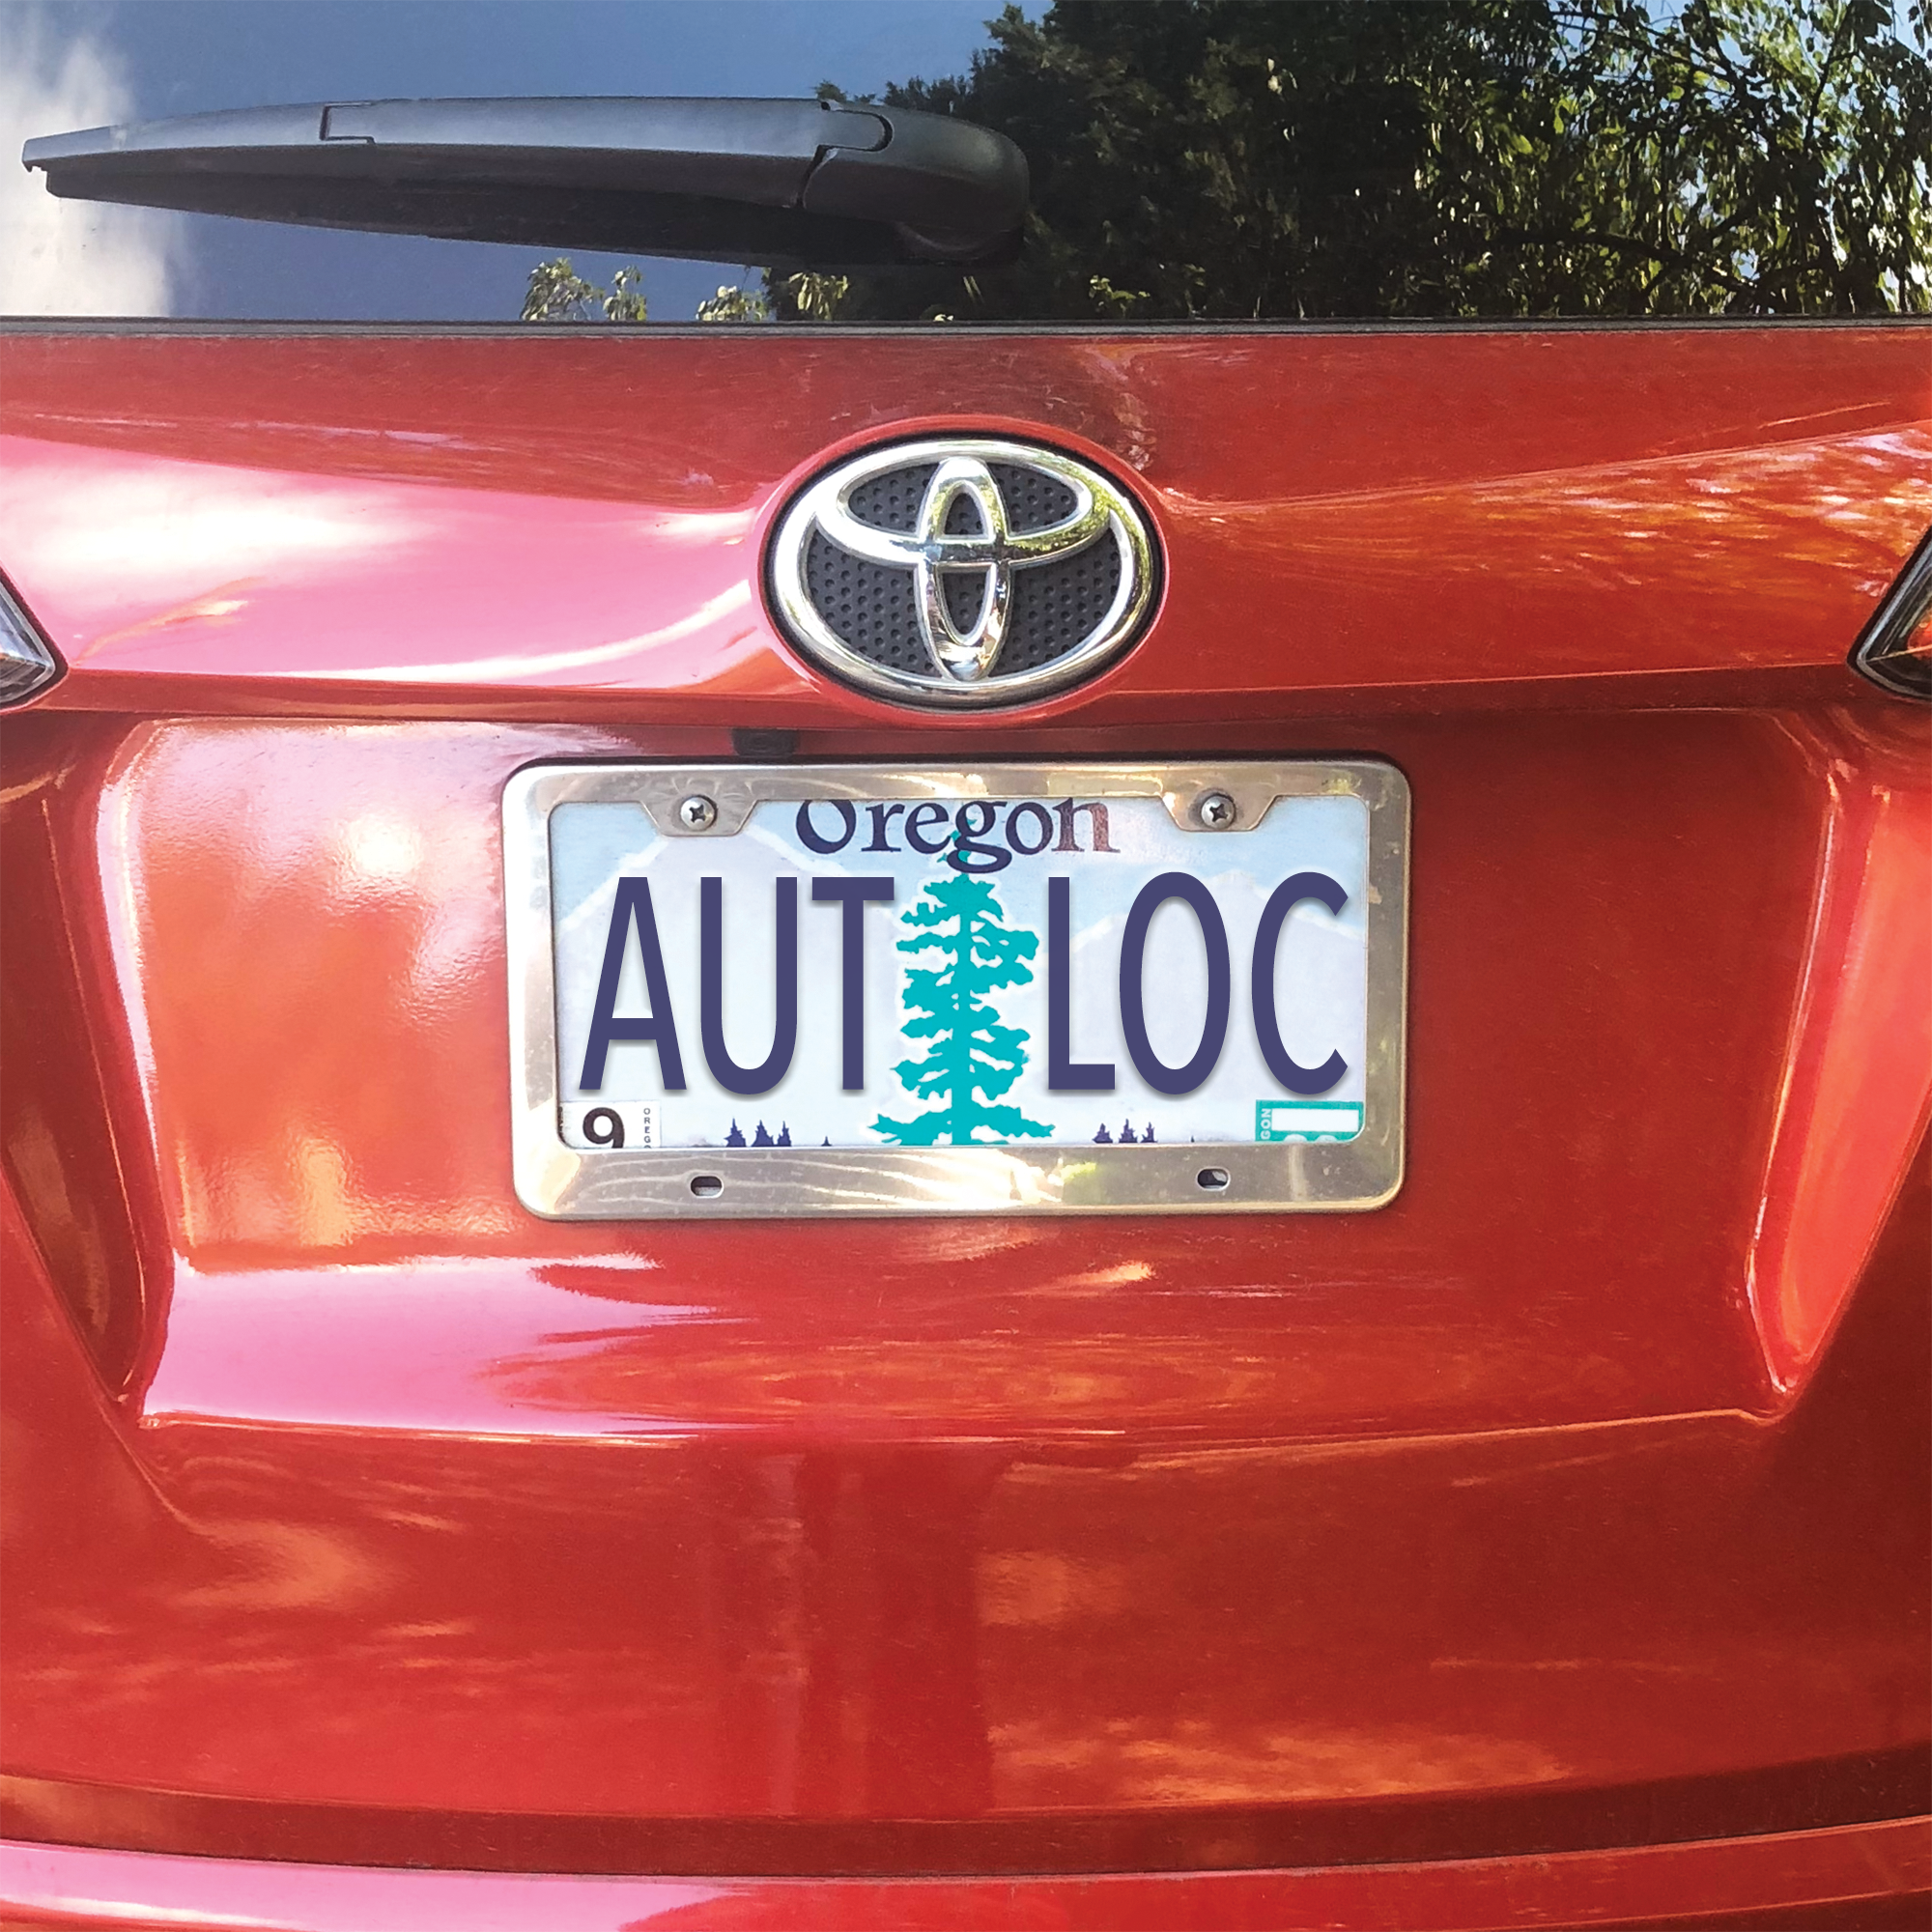 License Plate Frame installed on the Rear of a Toyota RAV4